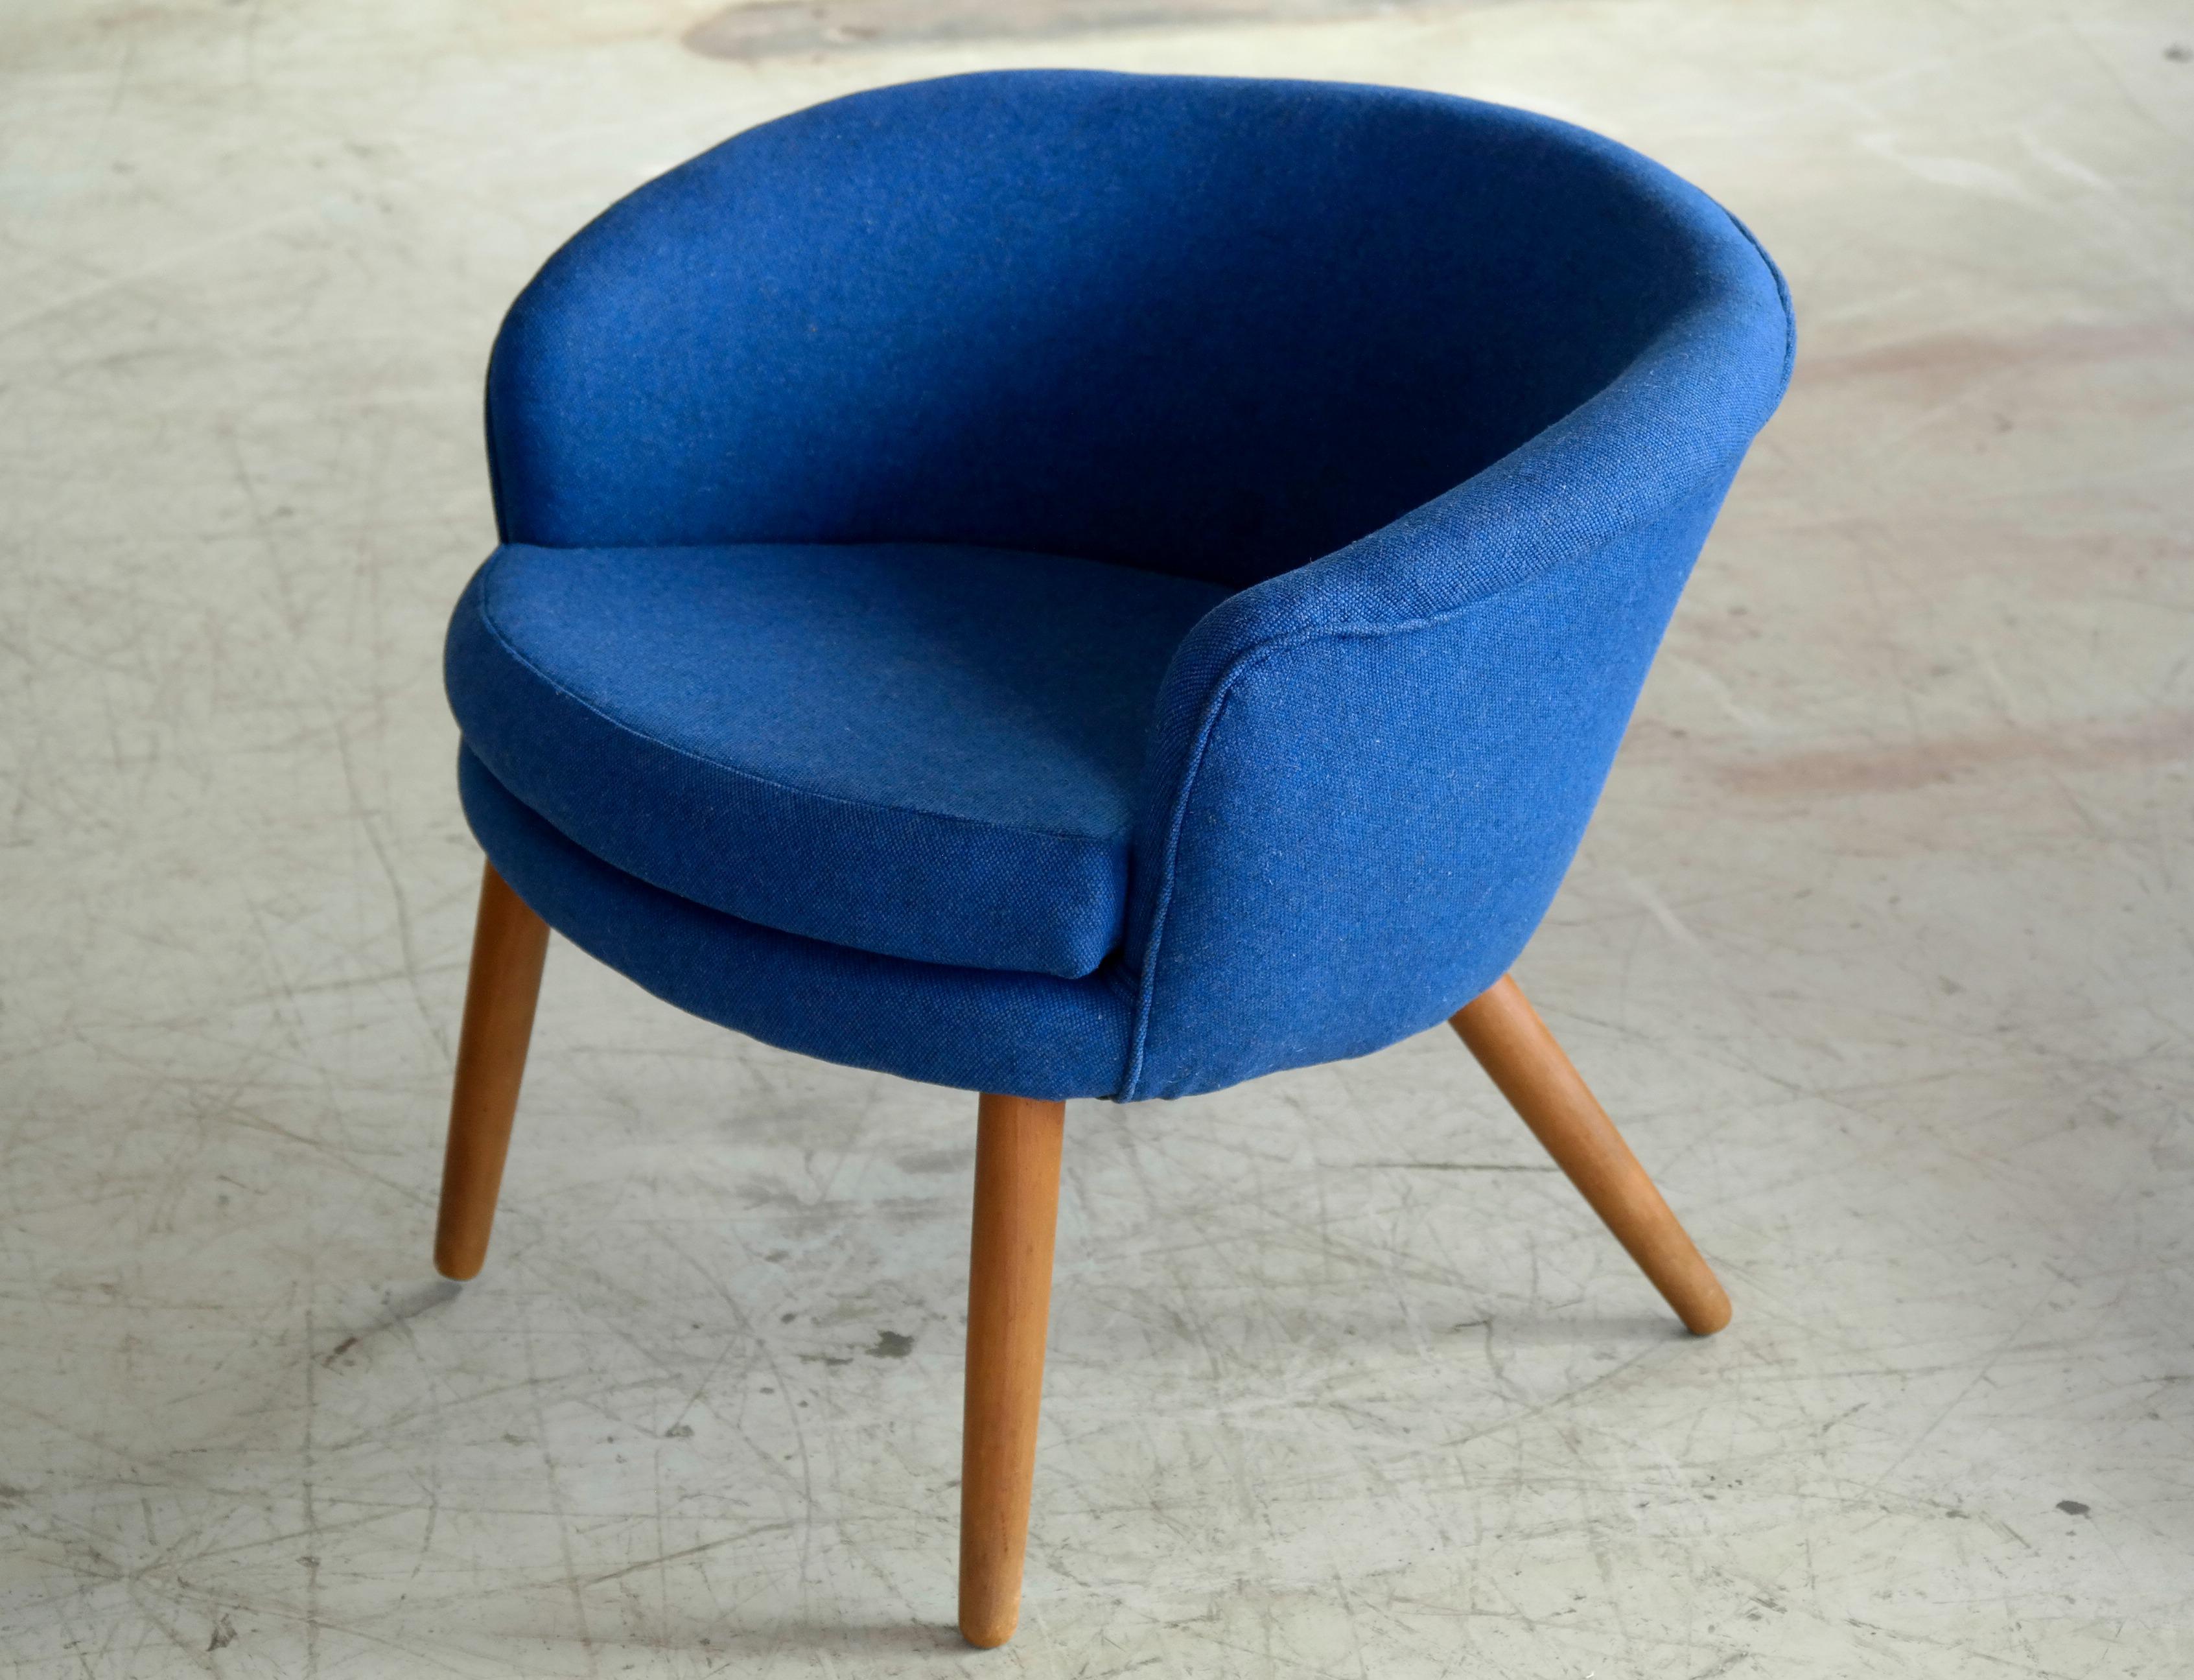 Mid-20th Century Nanna Ditzel Style Danish 1950s Lounge Chair Newly Reupholstered in Wool